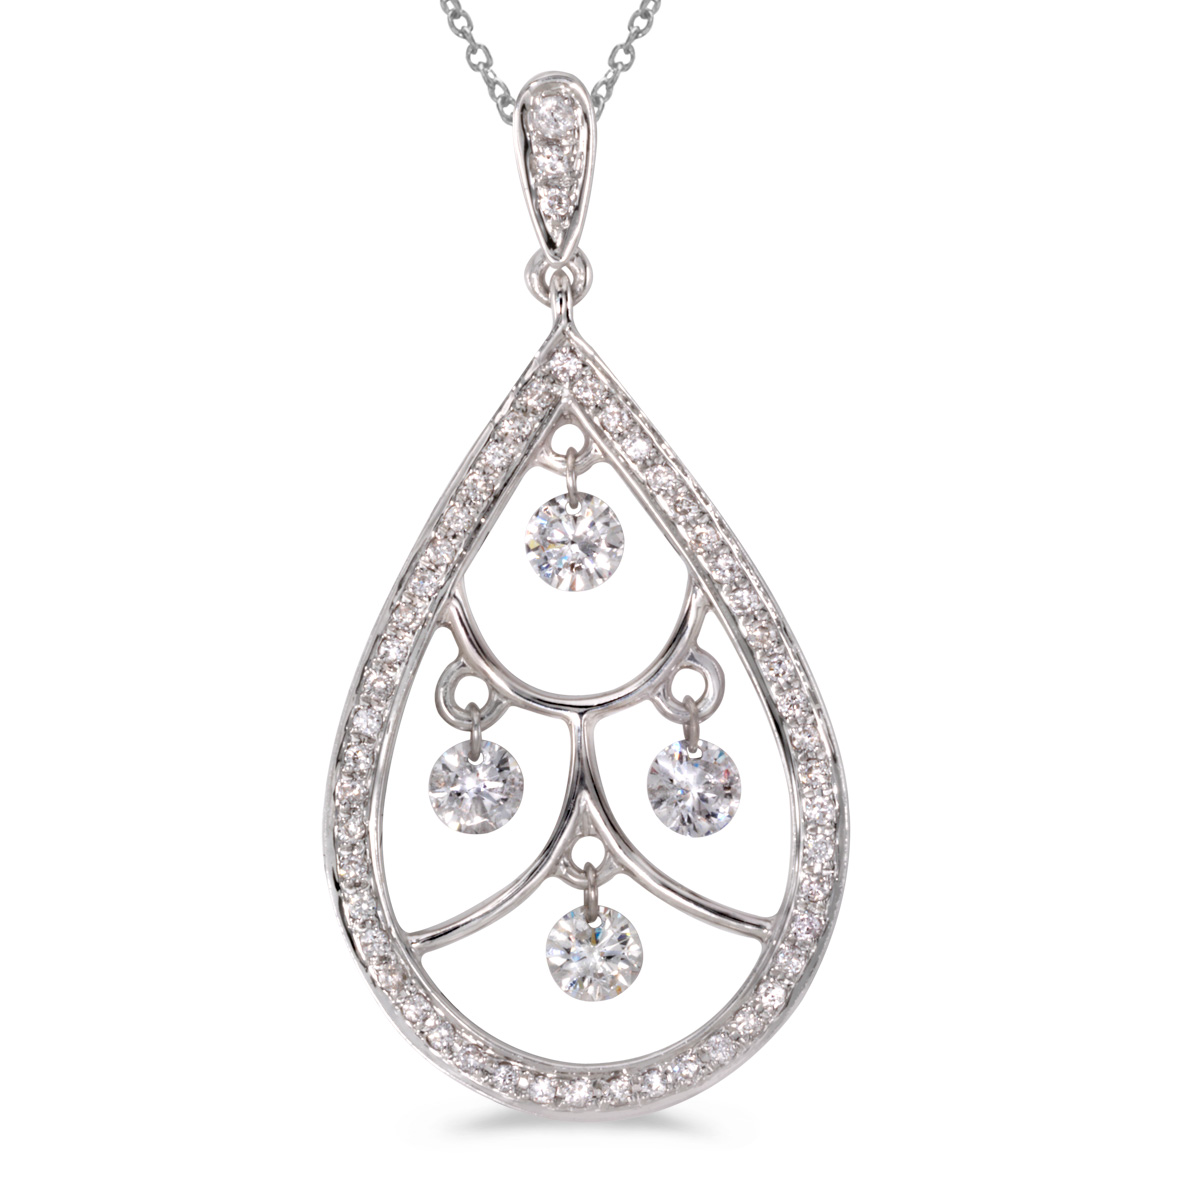 JCX2891: 14k gold Dashinng Diamonds pendant with 0.48 total ct diamonds. The center dangling diamond dances and shimmers with every heartbeat.